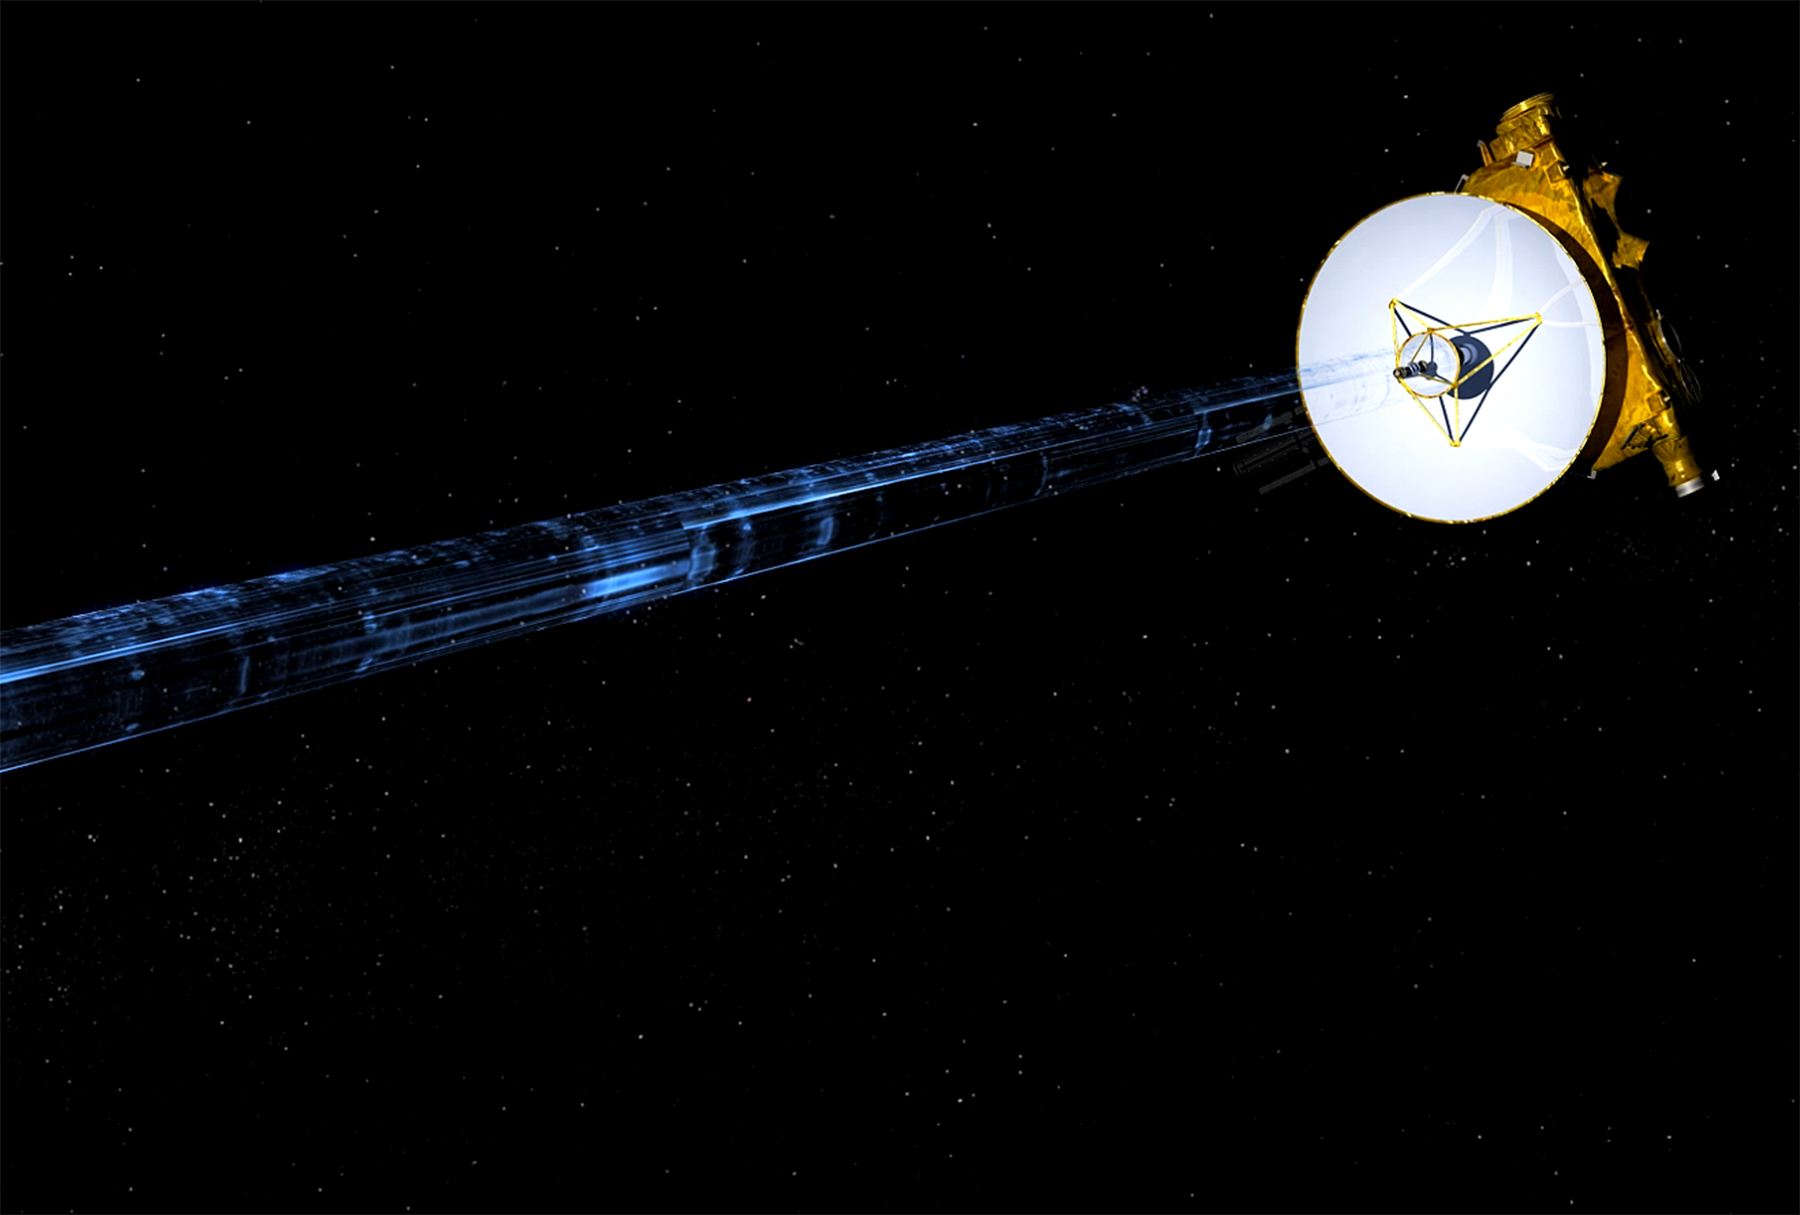 Artist's depiction of data being sent by New Horizons back to Earth. Image Credit: NASA/JHUAPL/SwRI